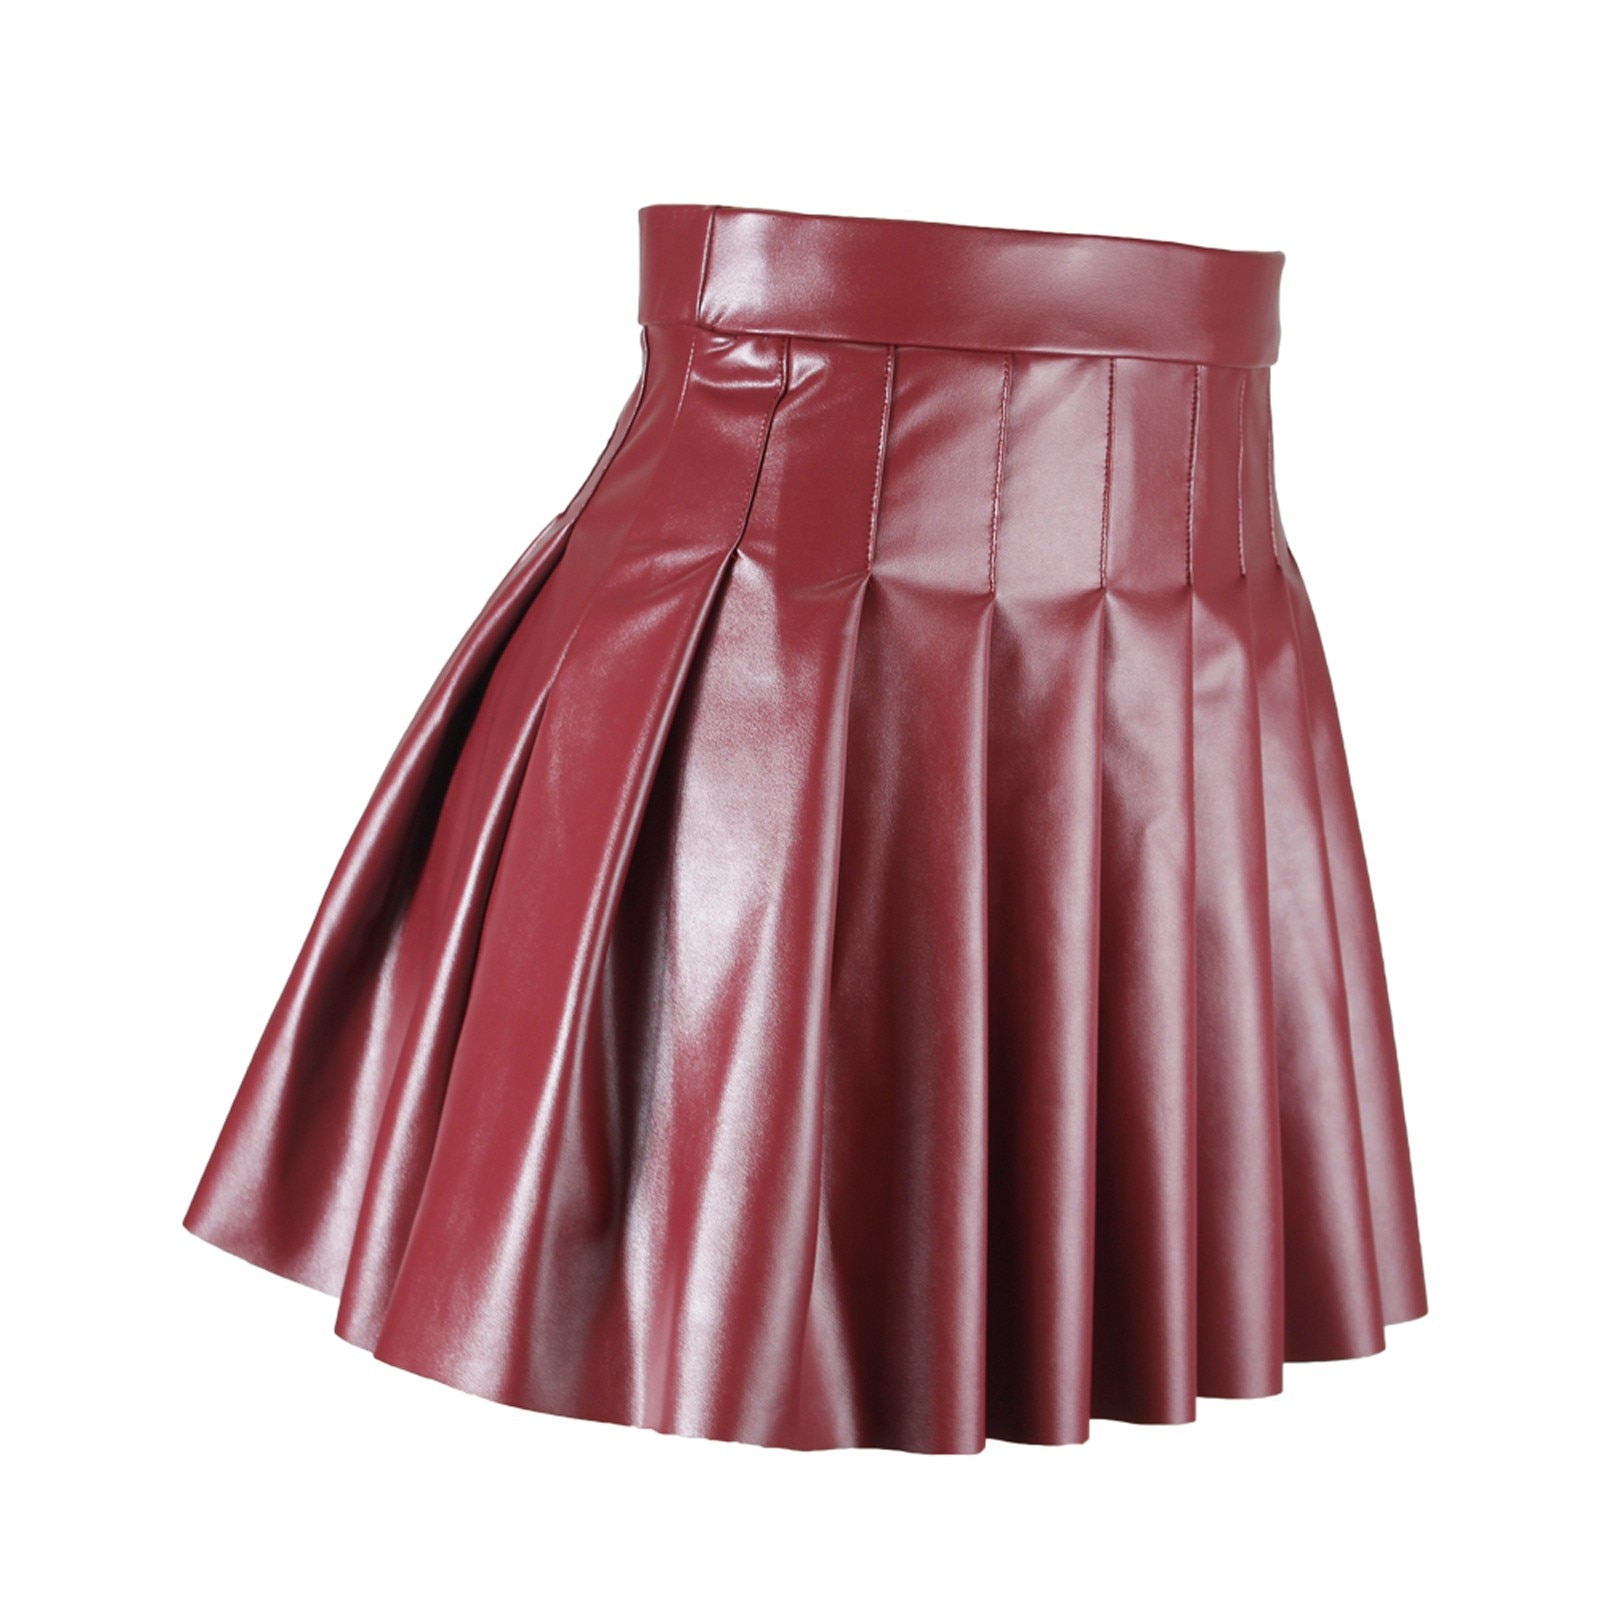 Women High Waist Pleated Skirt Spring Summer Casual Faux Leather A-line Black Leather Mini Skirts for Girls Y2k Skort Clothes